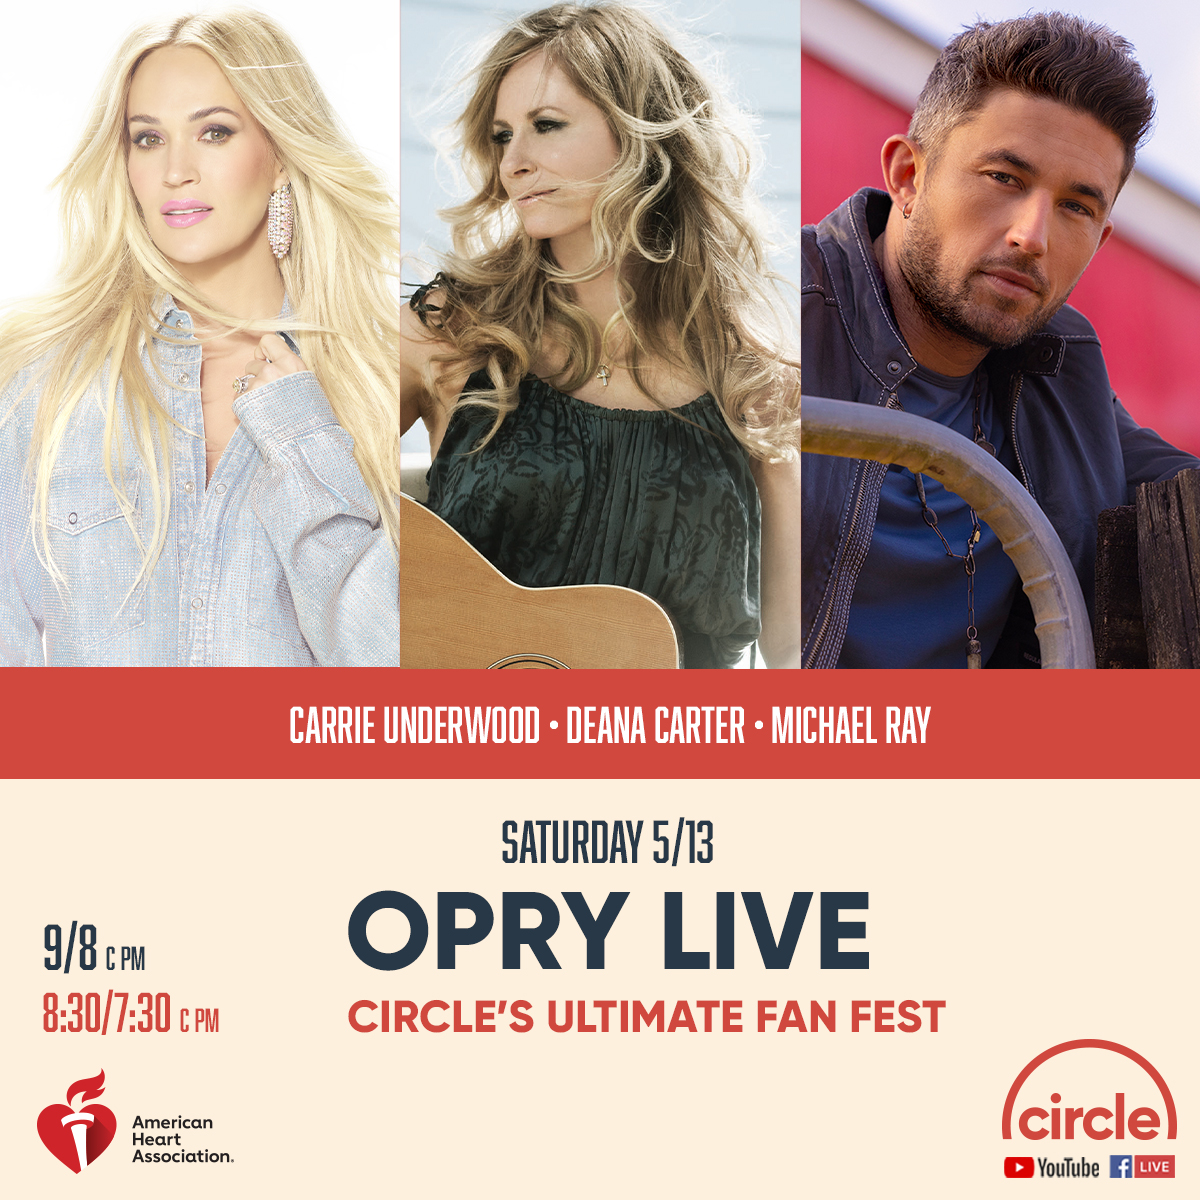 Join me, @carrieunderwood and @michaelraymusic for a special @opry  Live this Saturday at 9/8c pm. Download the new @circleallaccess (Circle Now) app to stream. #OpryLive #CircleAllAccess